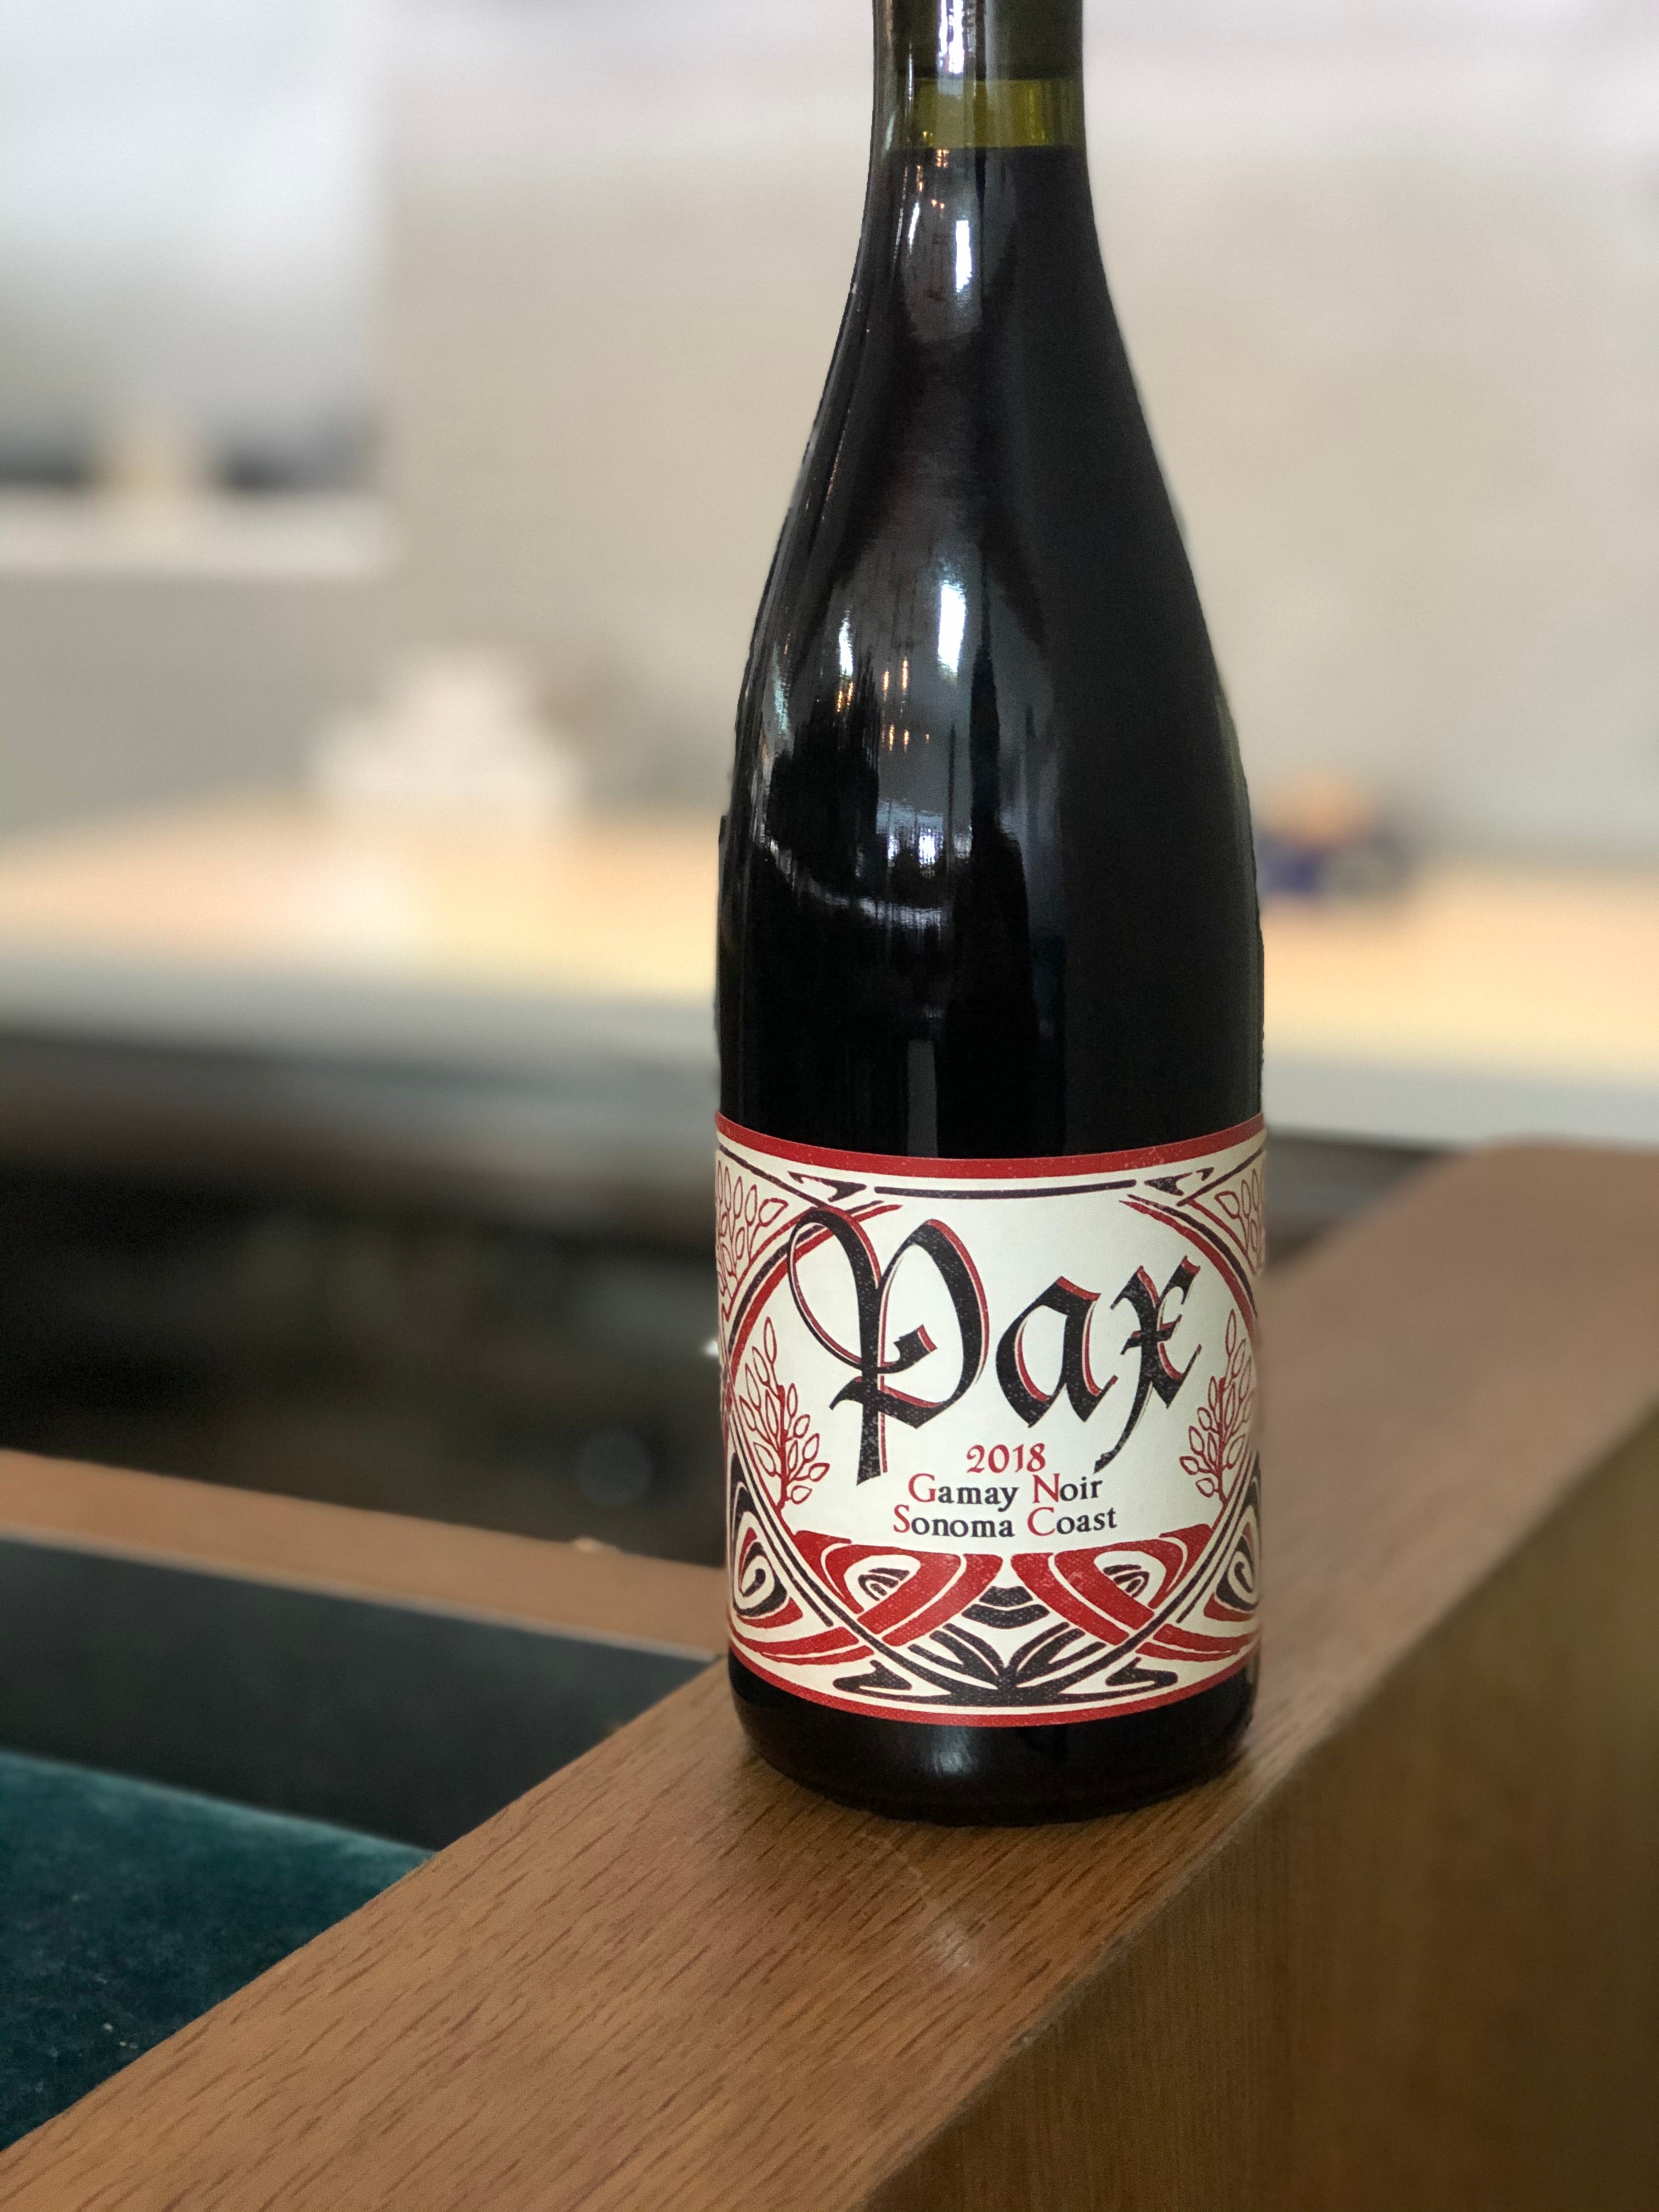 Pax Mahle, Gamay Noir, Sonoma County 2018